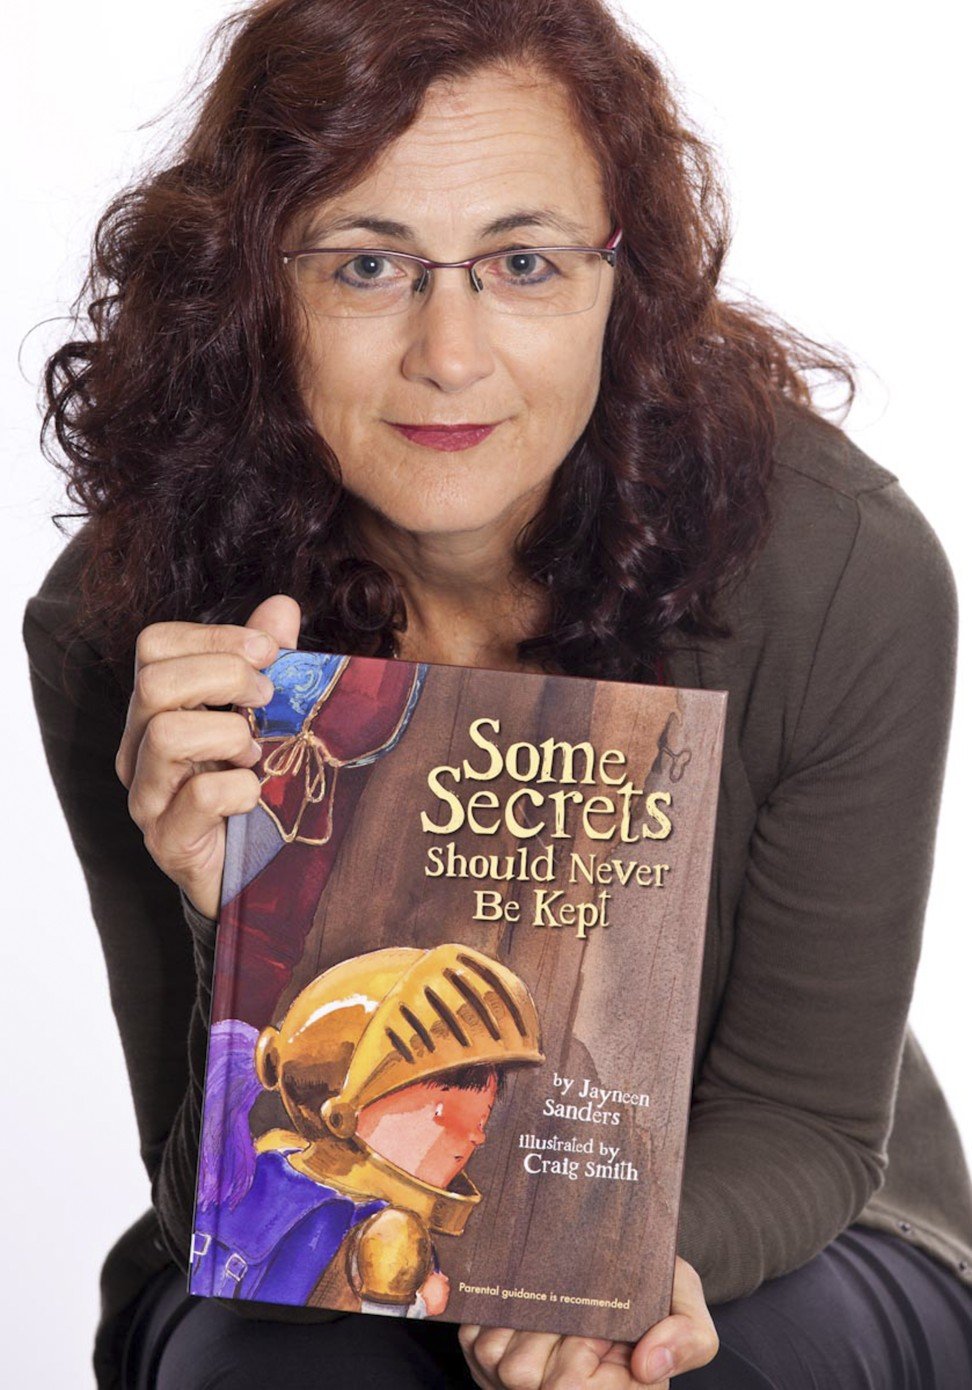 Jayneen Sanders, an Australian-based author and advocate for sexual abuse prevention education with her book Some Secrets Should Never Be Kept.